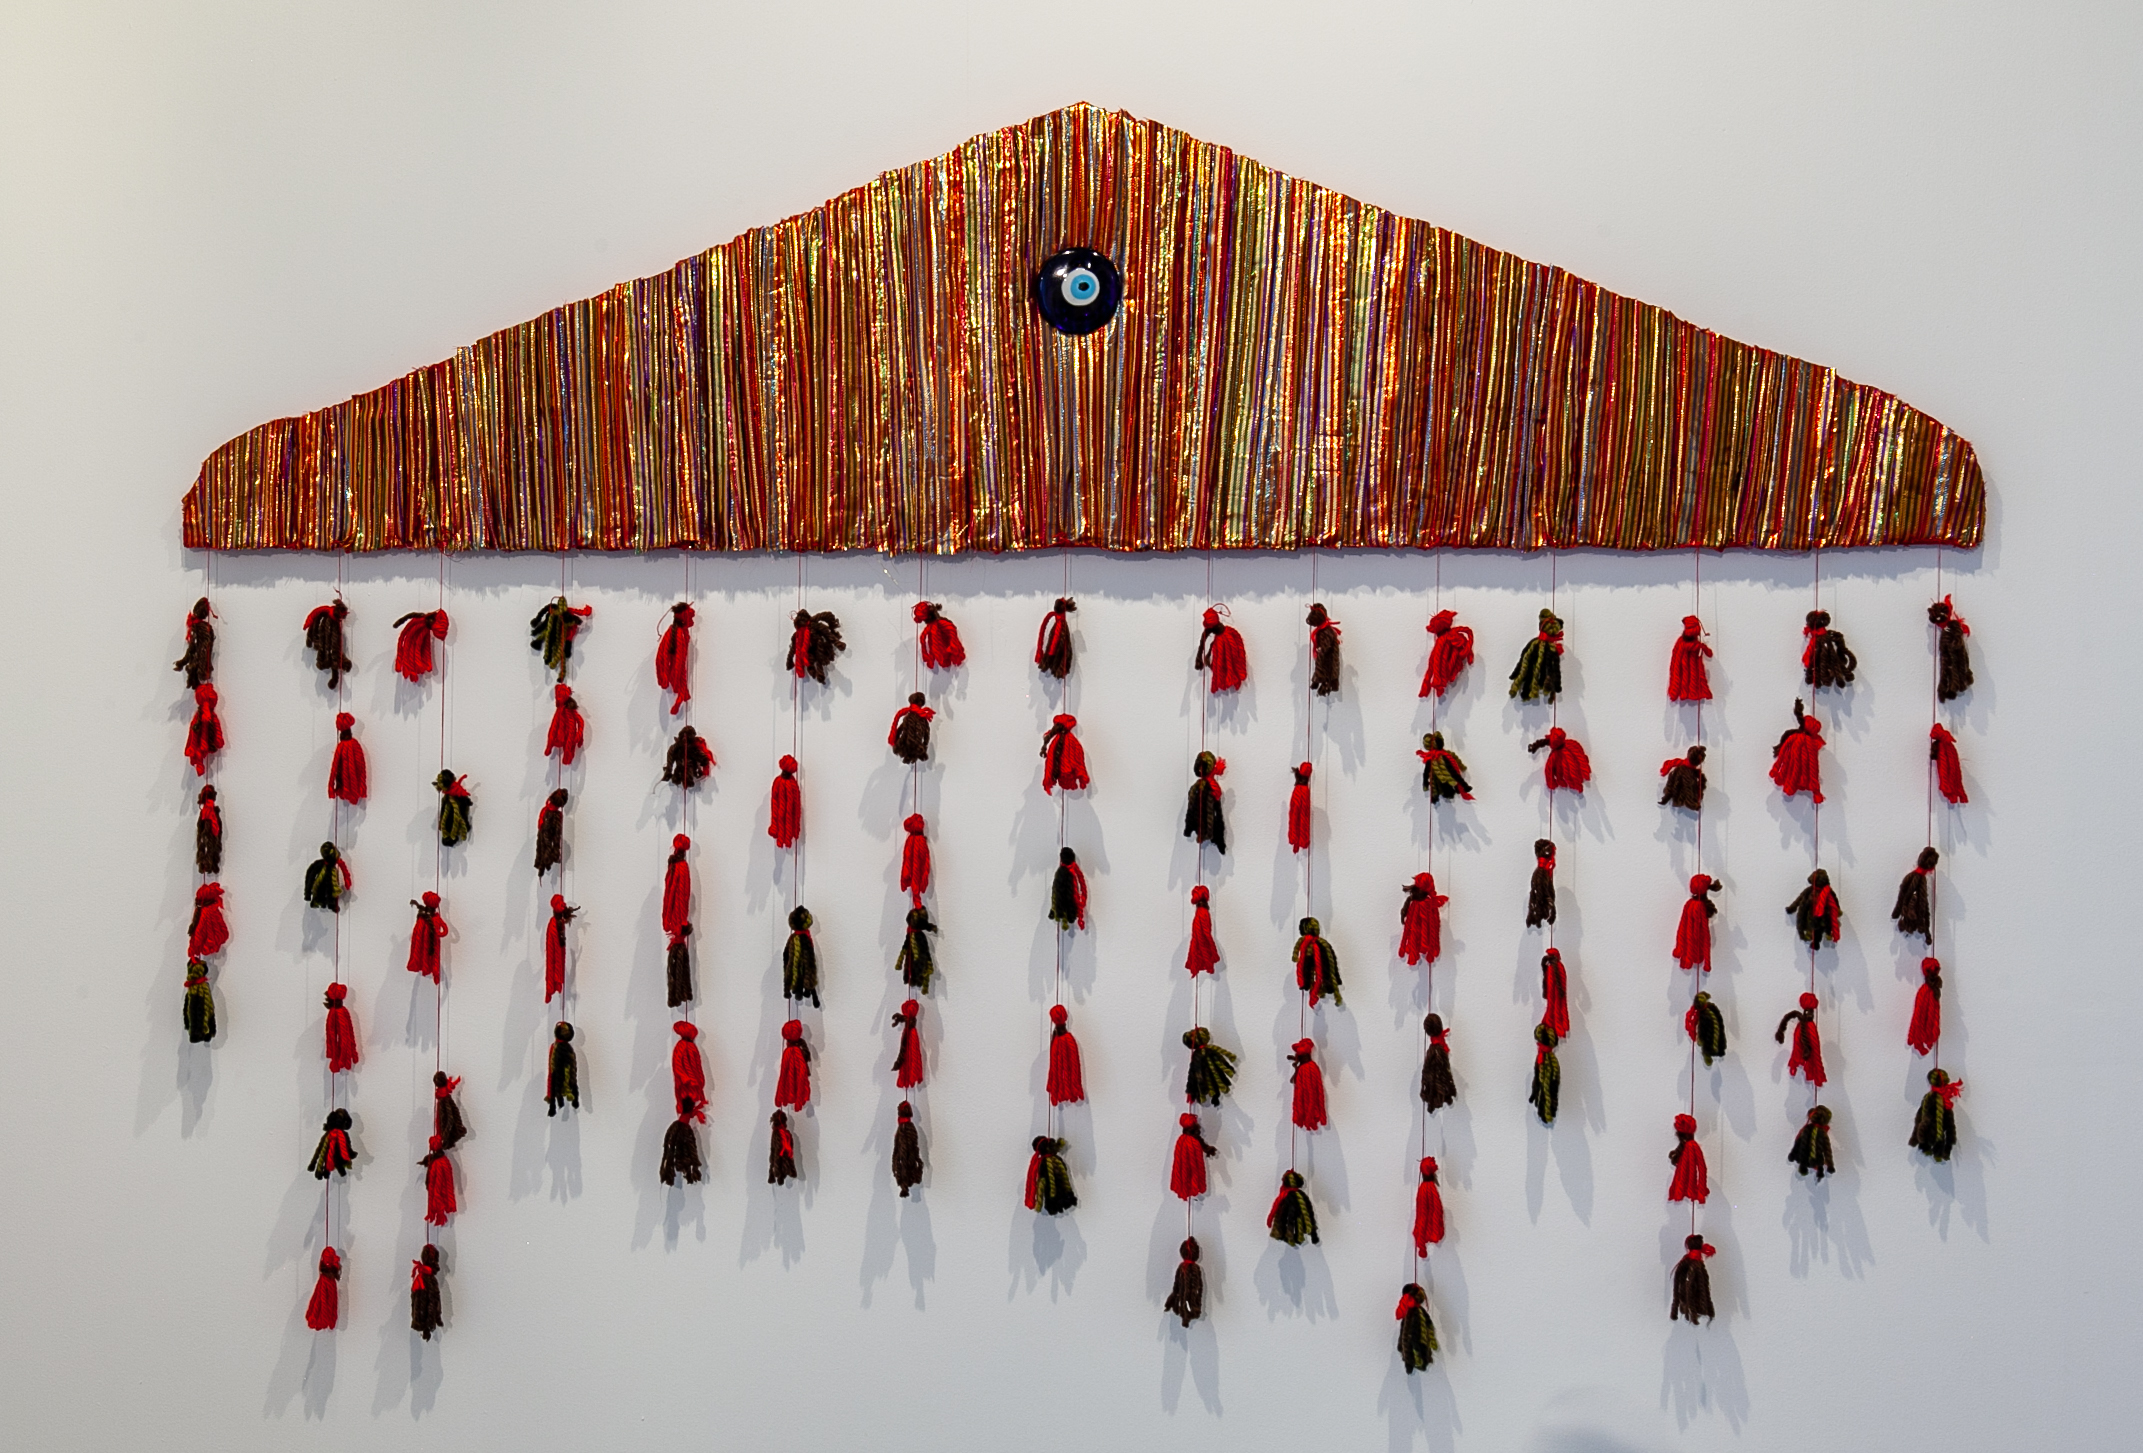  Nuveen Barwari (Nashville, TN)   House Wife , 2018  Medium: Fabric, acrylic paint, glass, and yarn on wood  Dimensions: 58x83 inches  “This piece was inspired by the Kurdish women presiding in my life. For years, I have watched members of my family 